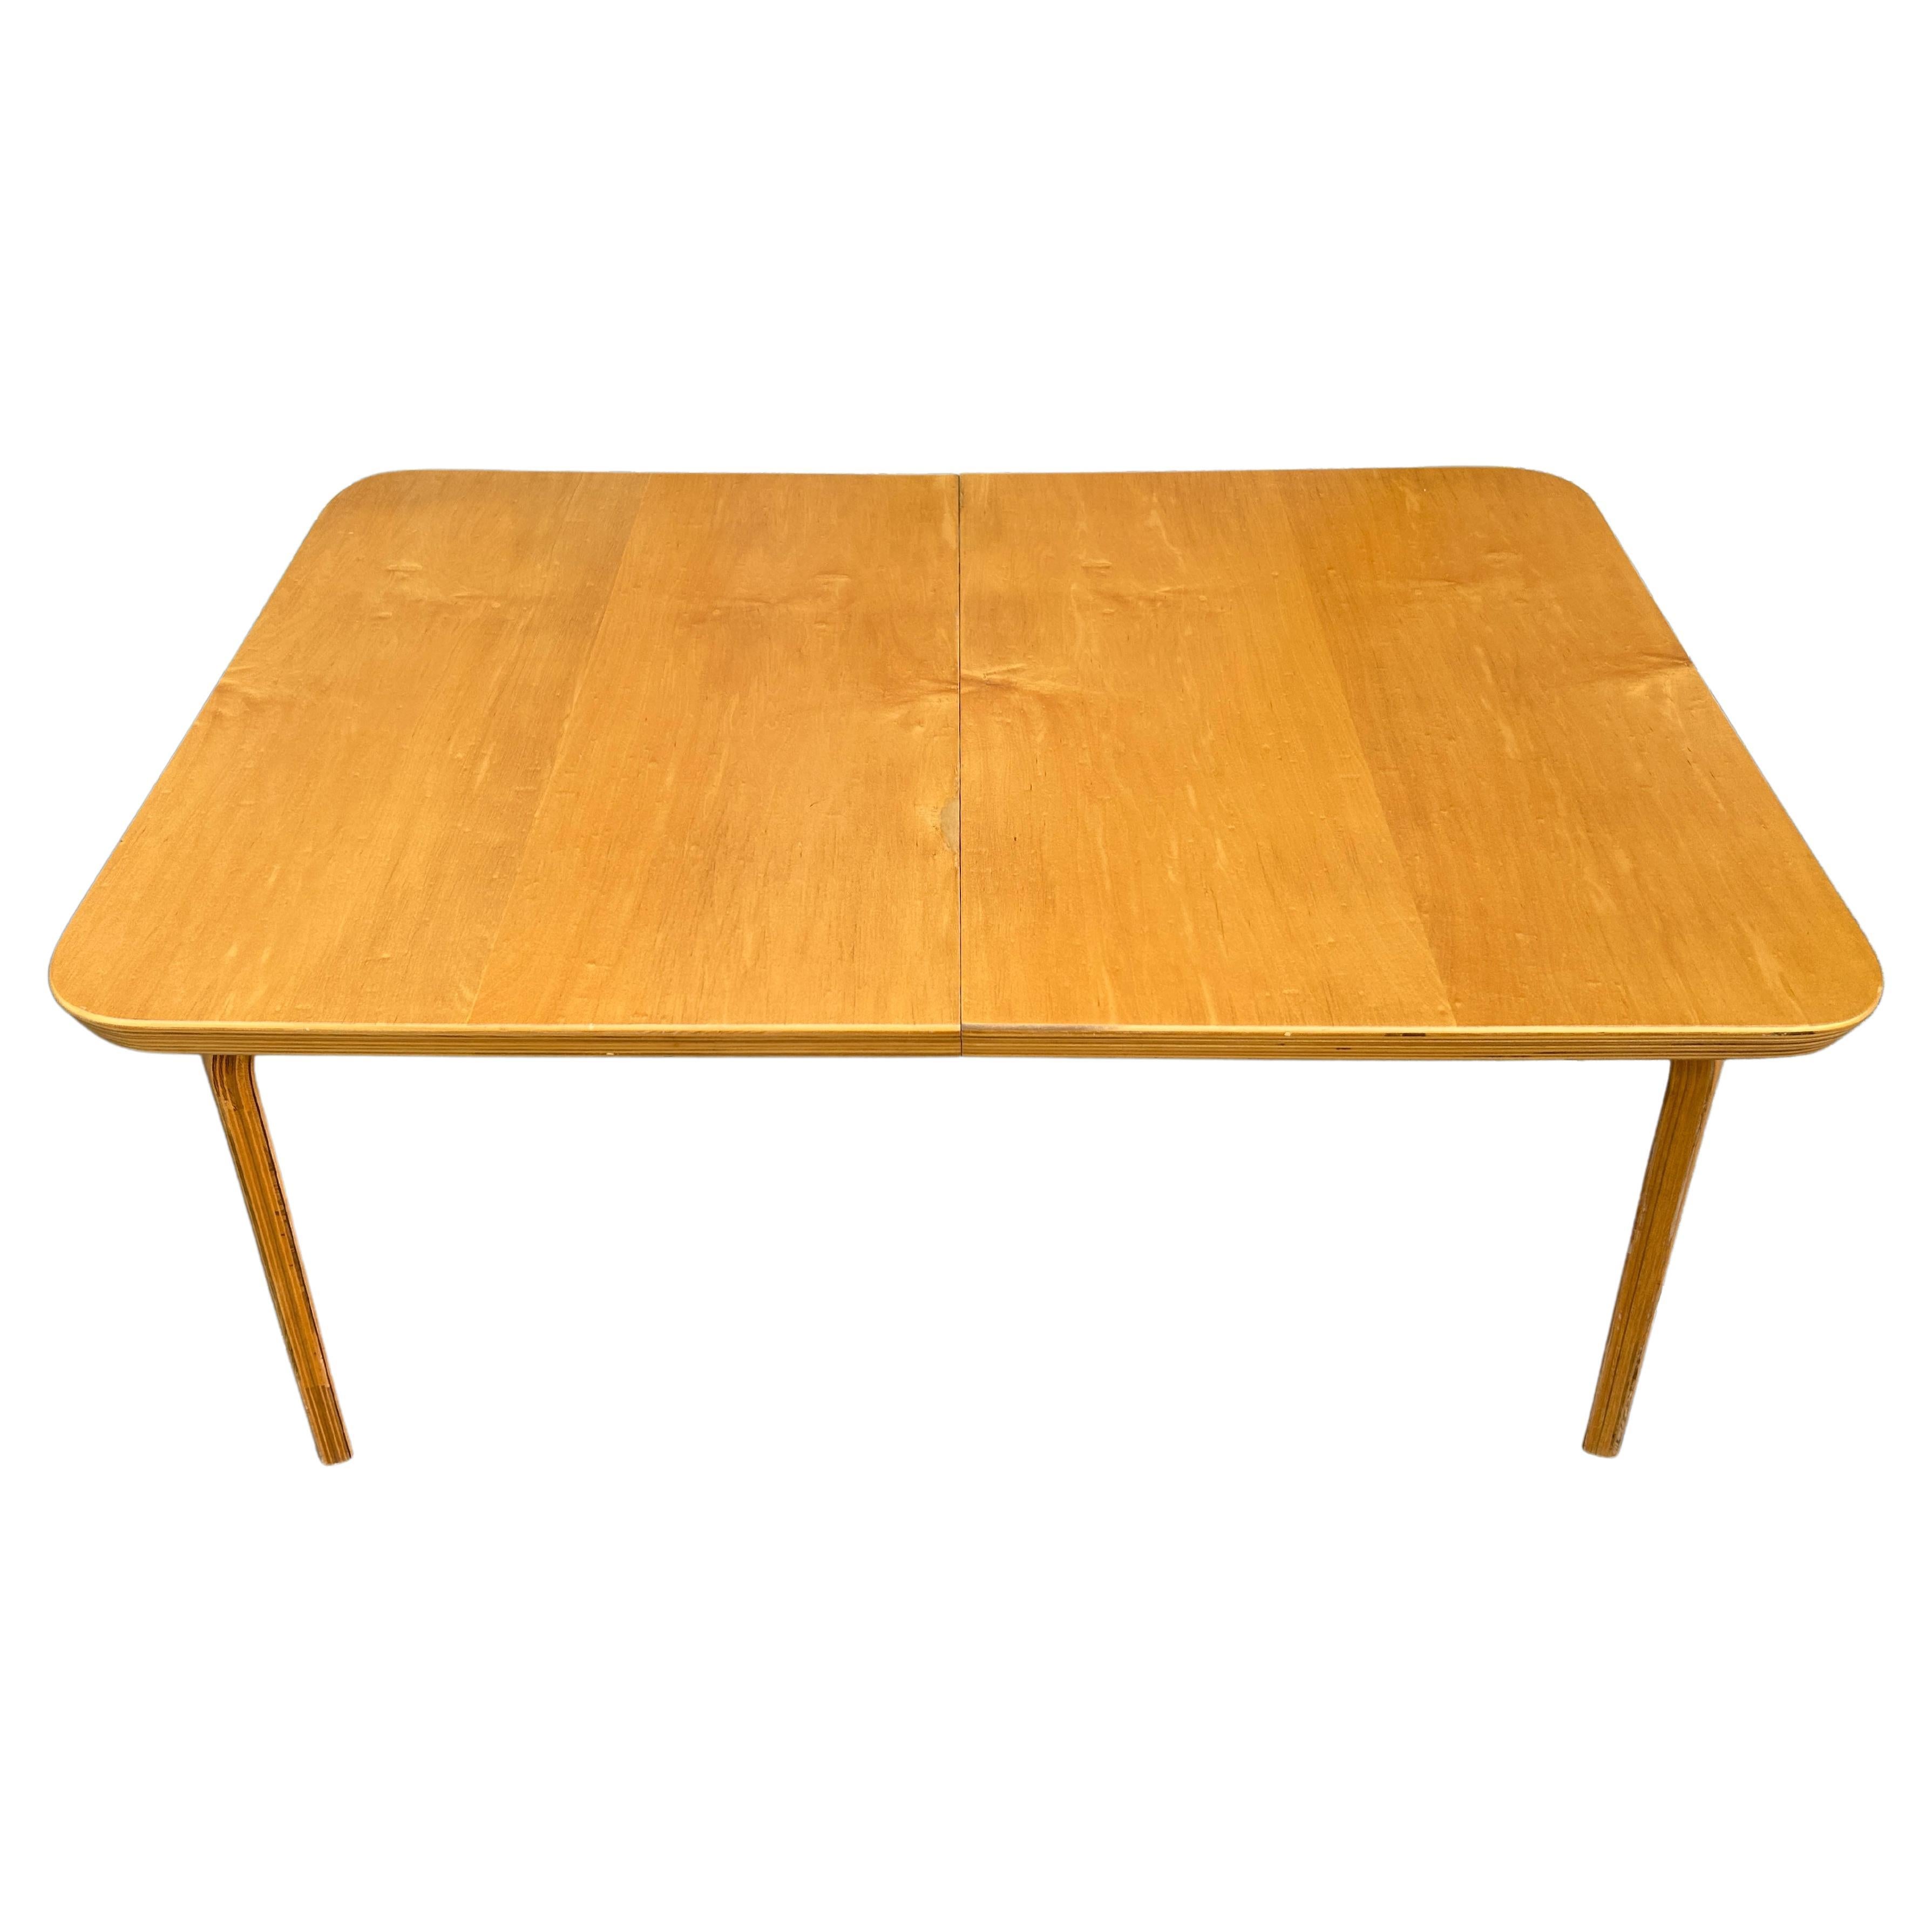 rounded corner dining table